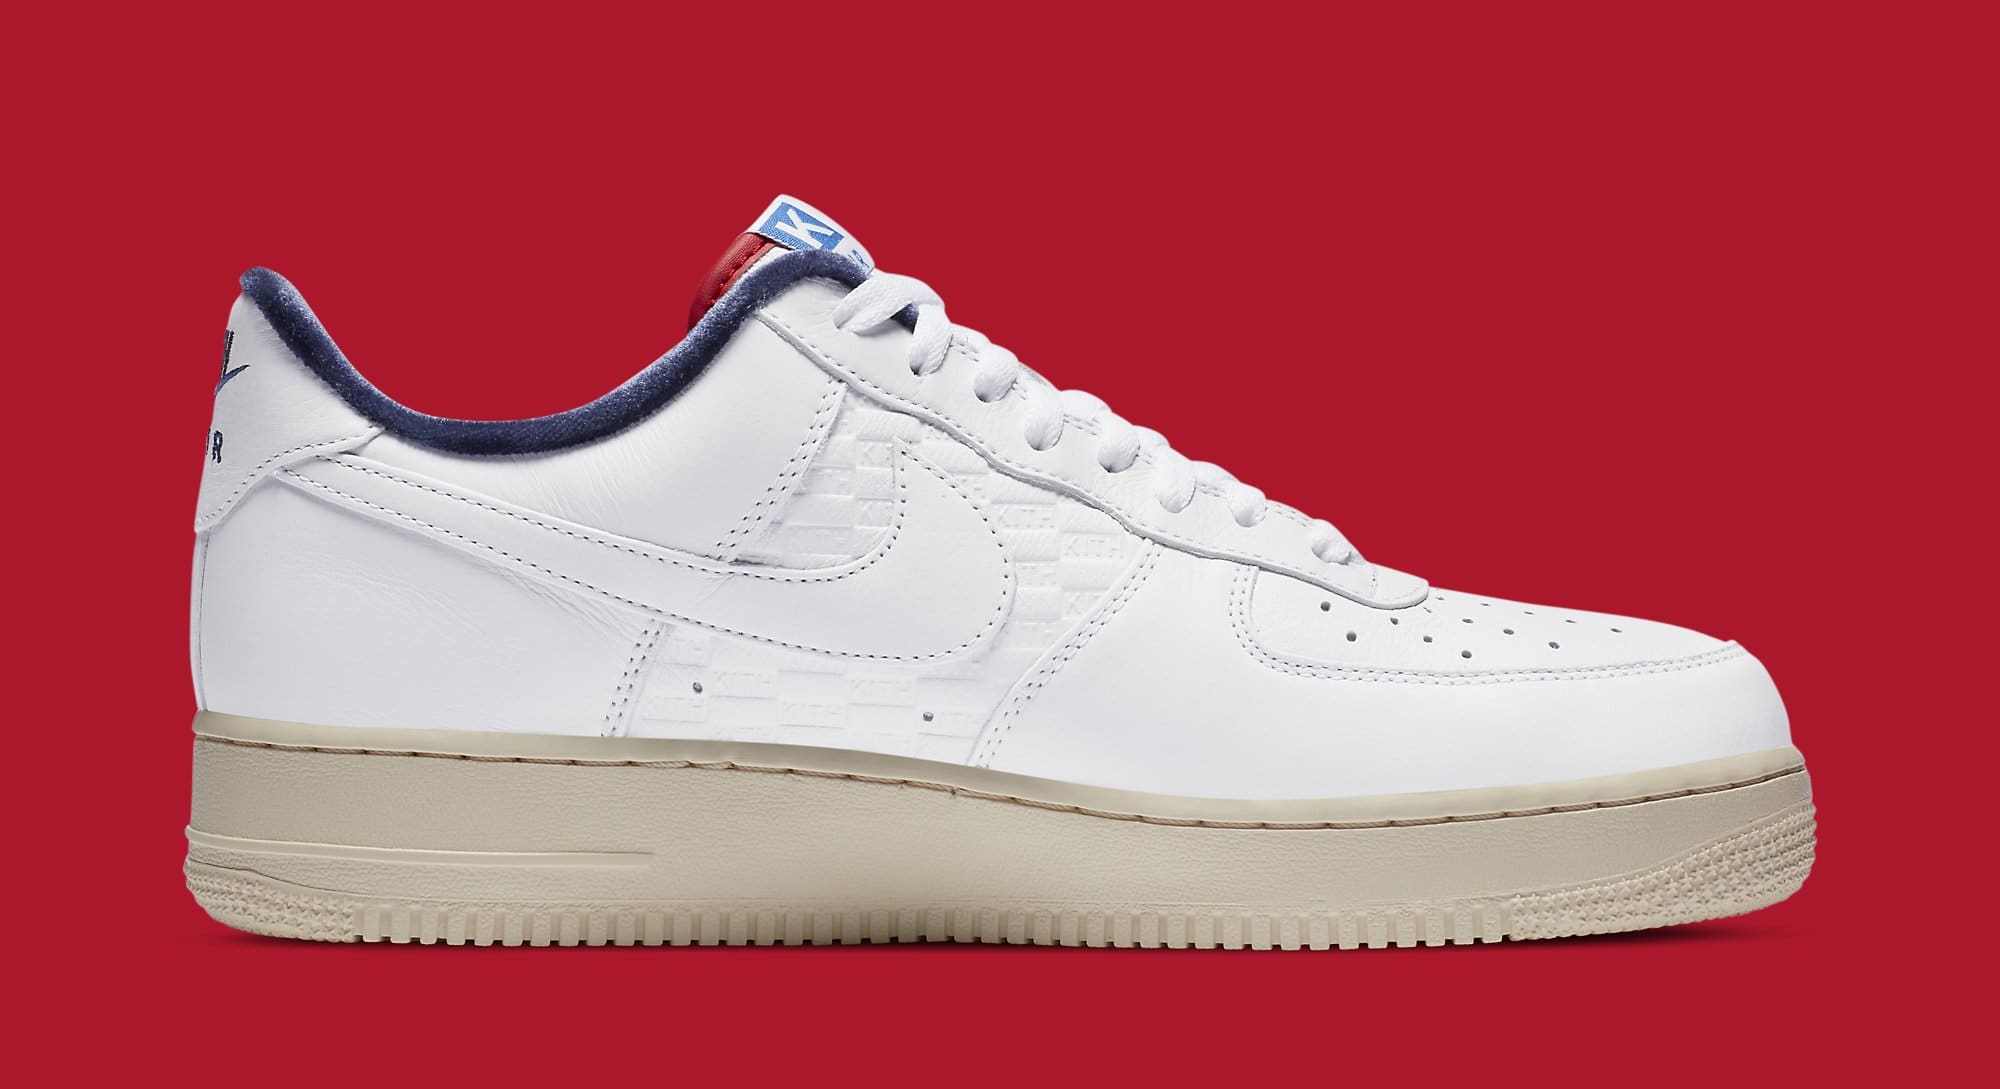 Kith x Nike Air Force 1 Low CZ7927-100 Medial